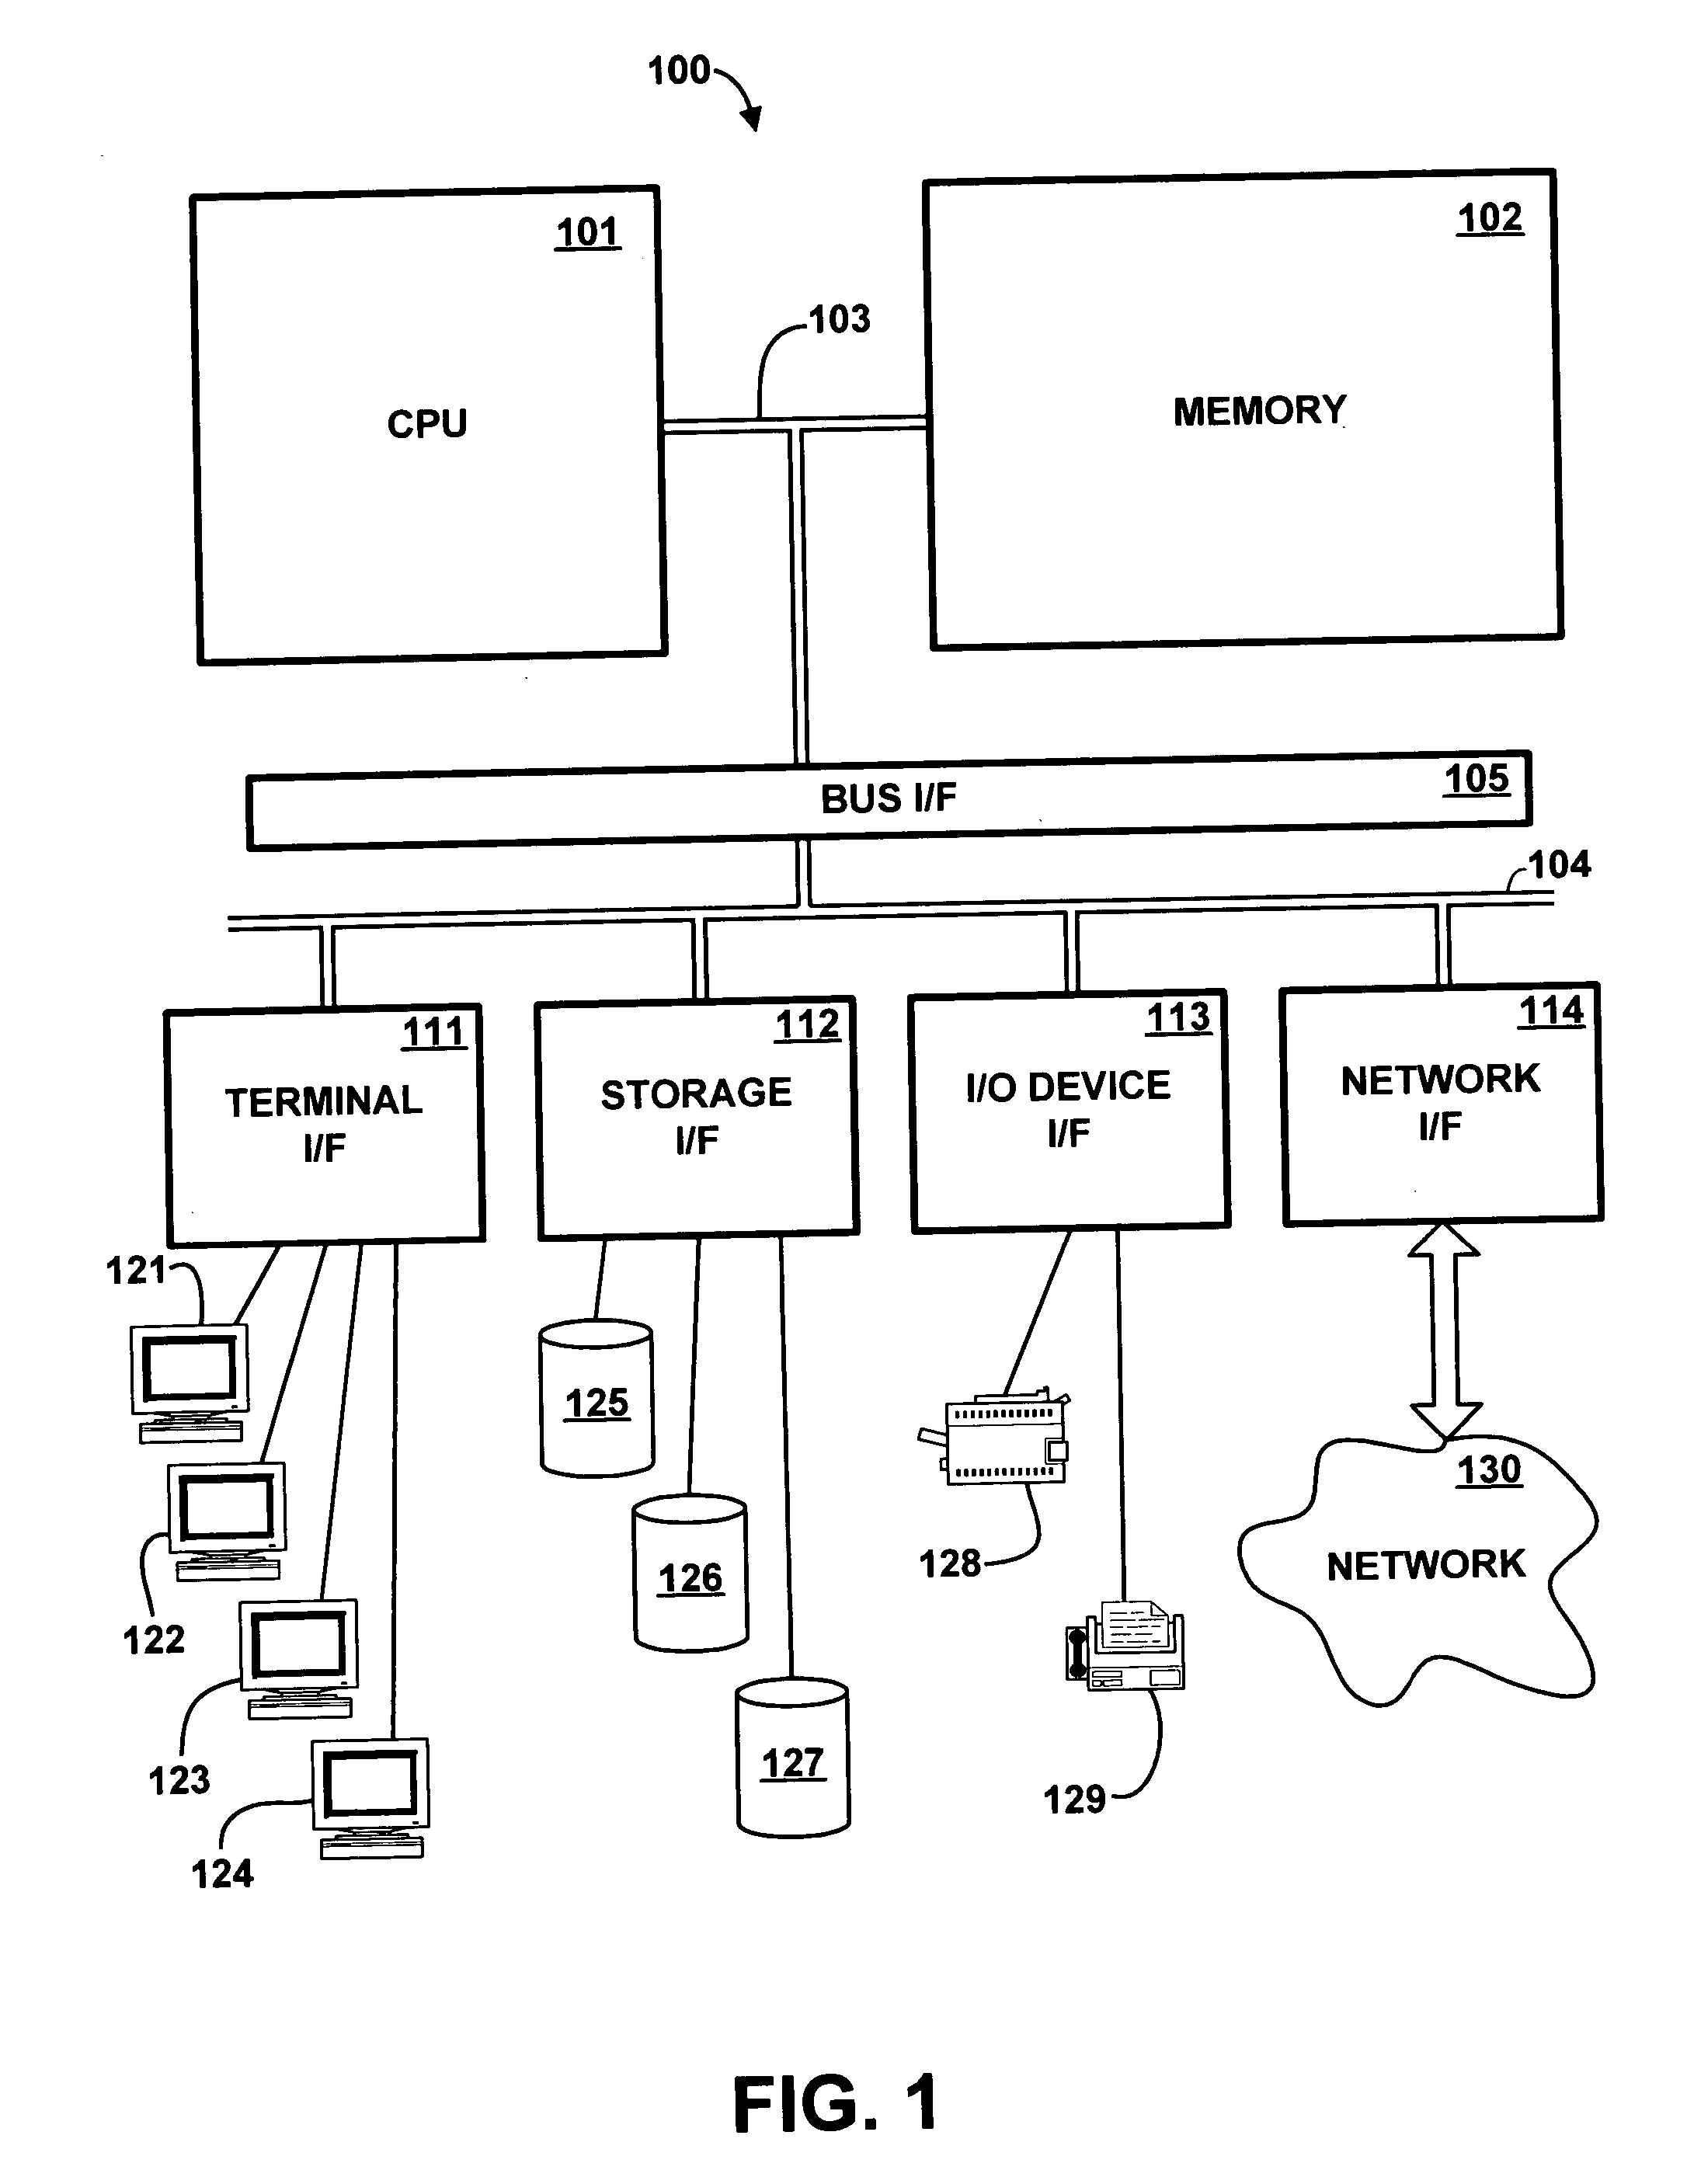 Method and apparatus for generating computer programming code selectively optimized for execution performance and not optimized for serviceability